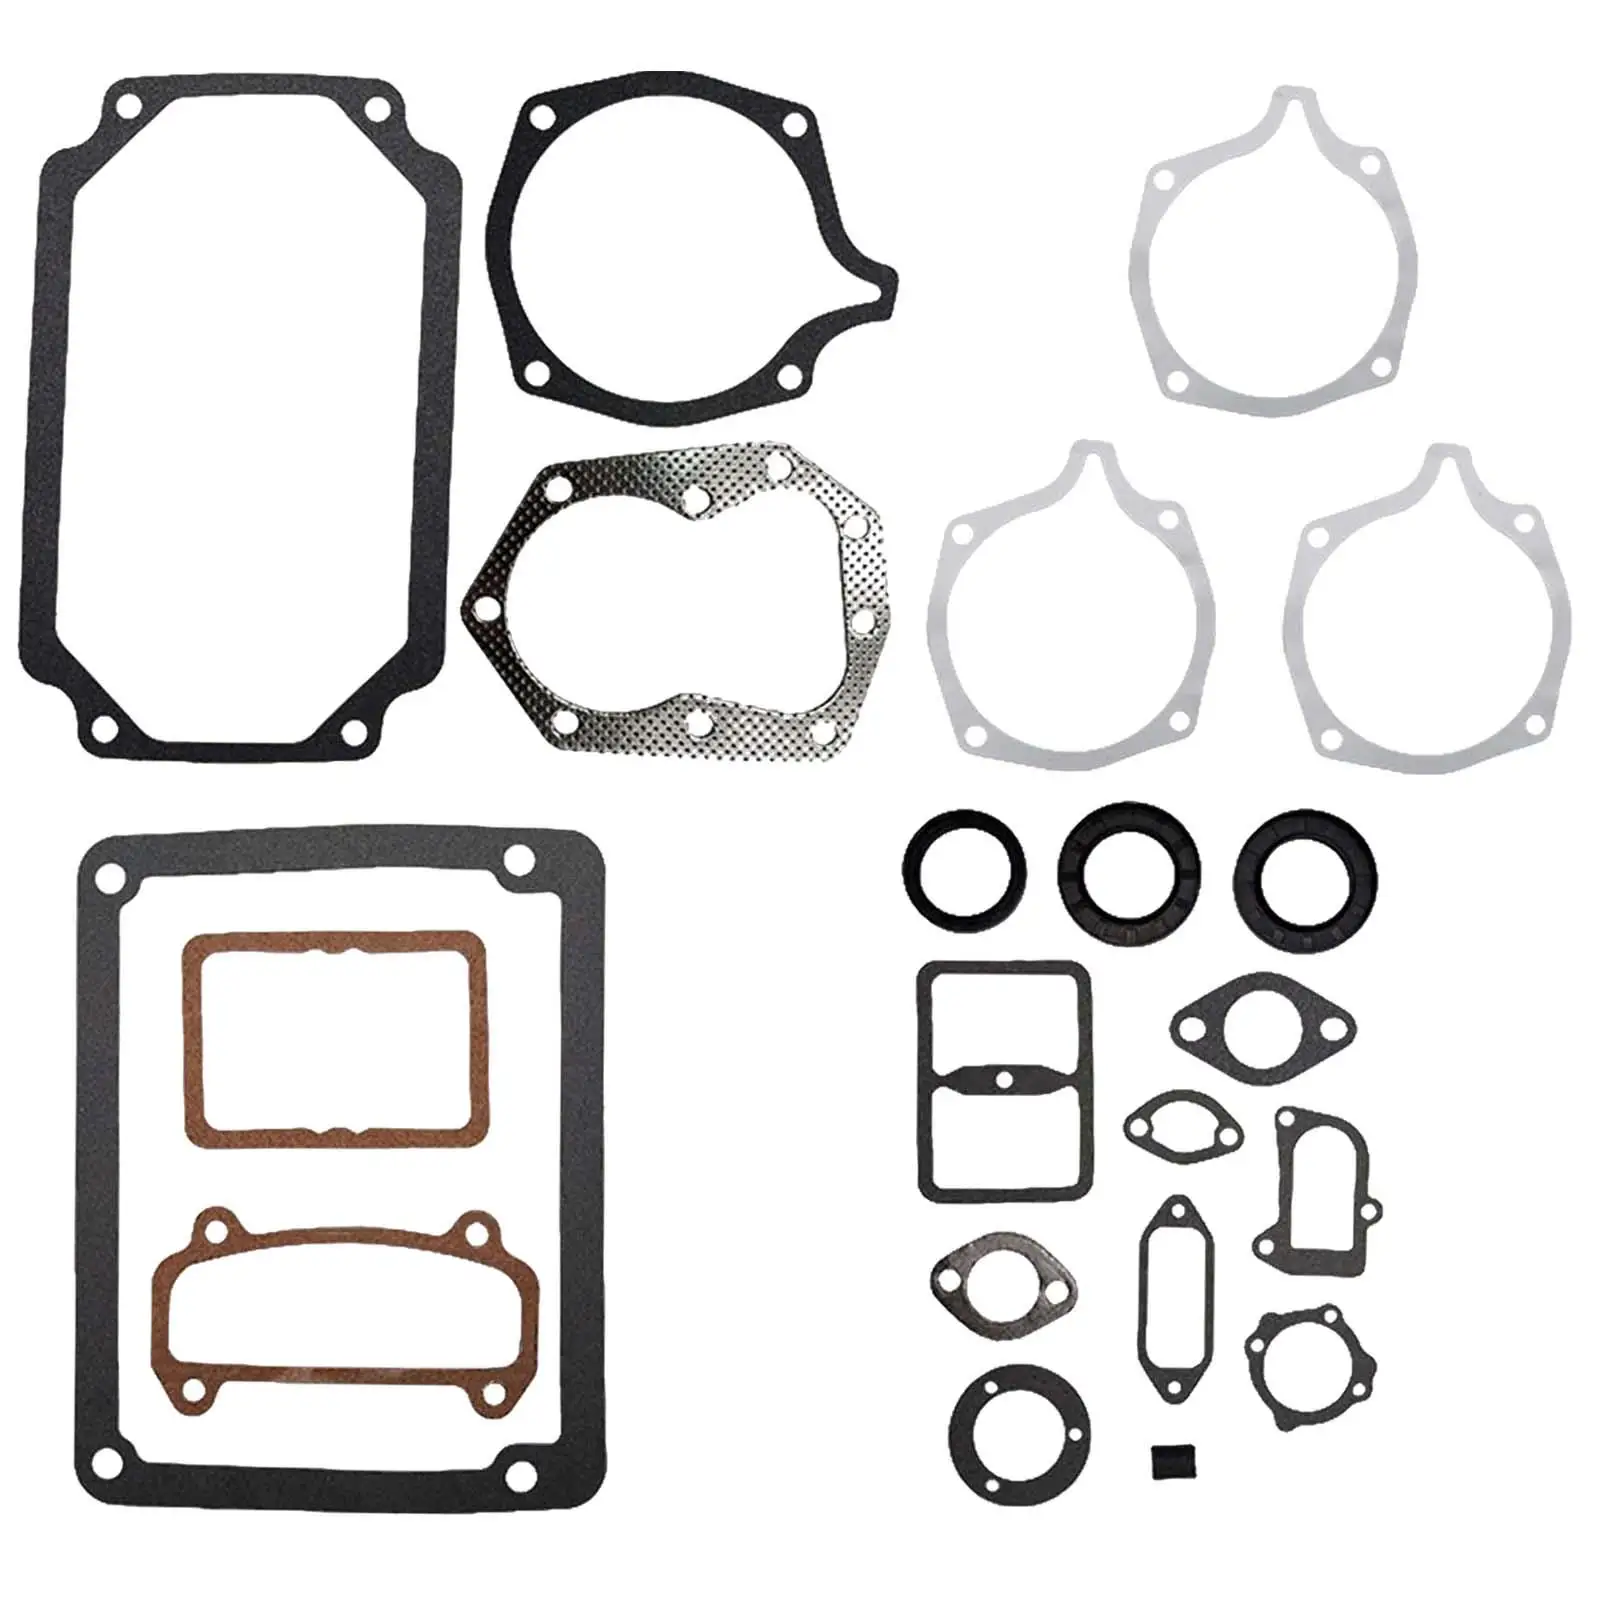 47 755 08-S Gasket Set Replacement Silver for  K241  Mowers 10 12 14 HP Engines Horticulture Garden Lawn